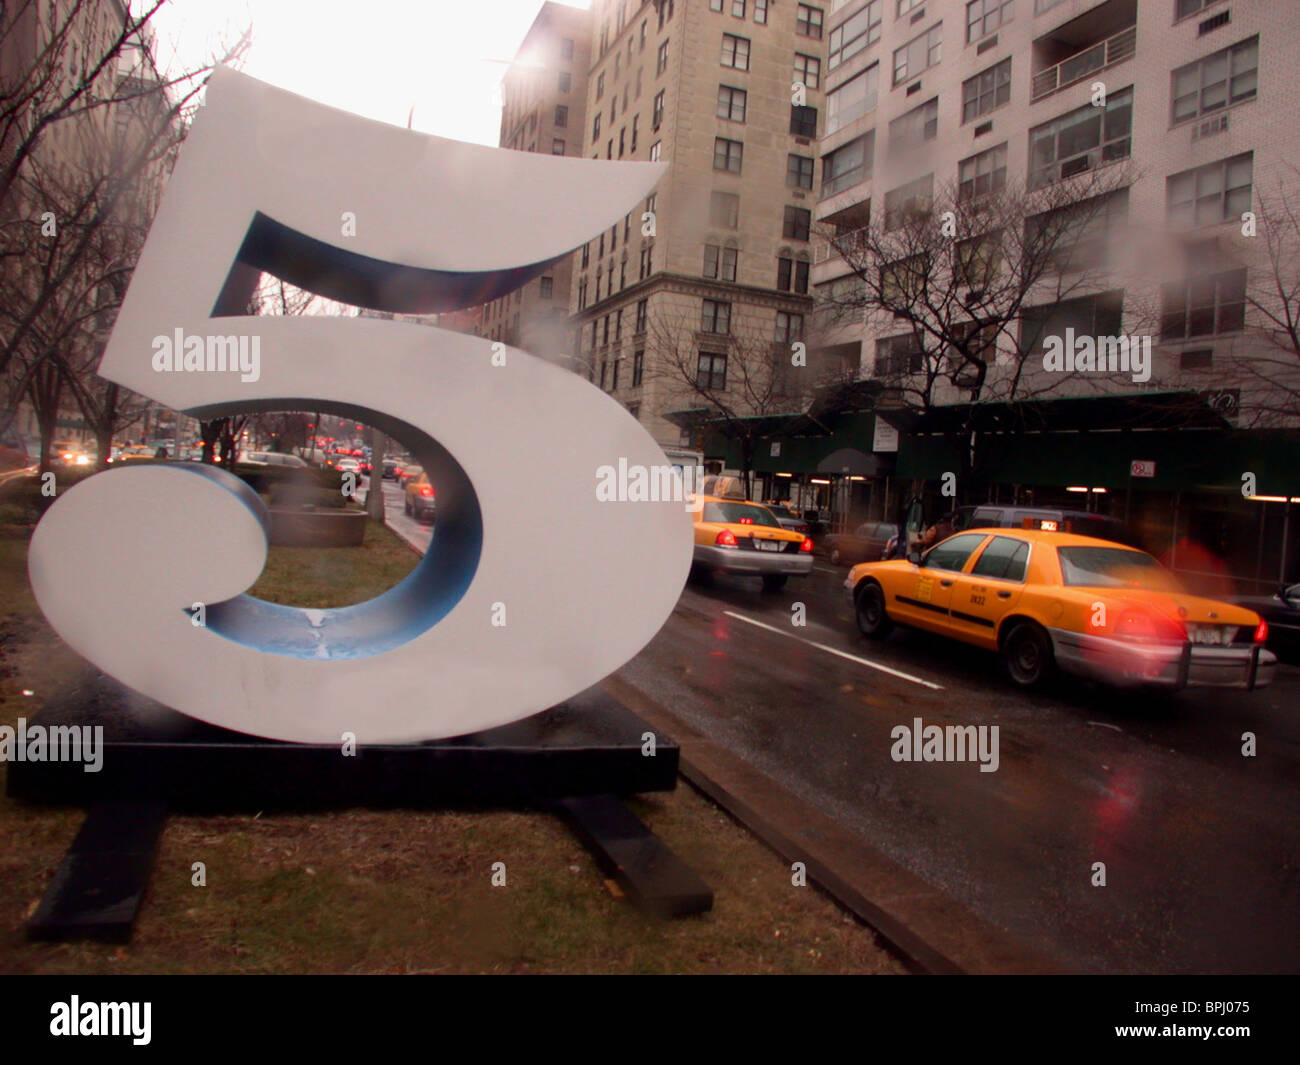 The public art sculpture '1 Through 0' on Park Avenue by the artist Robert Indiana Stock Photo